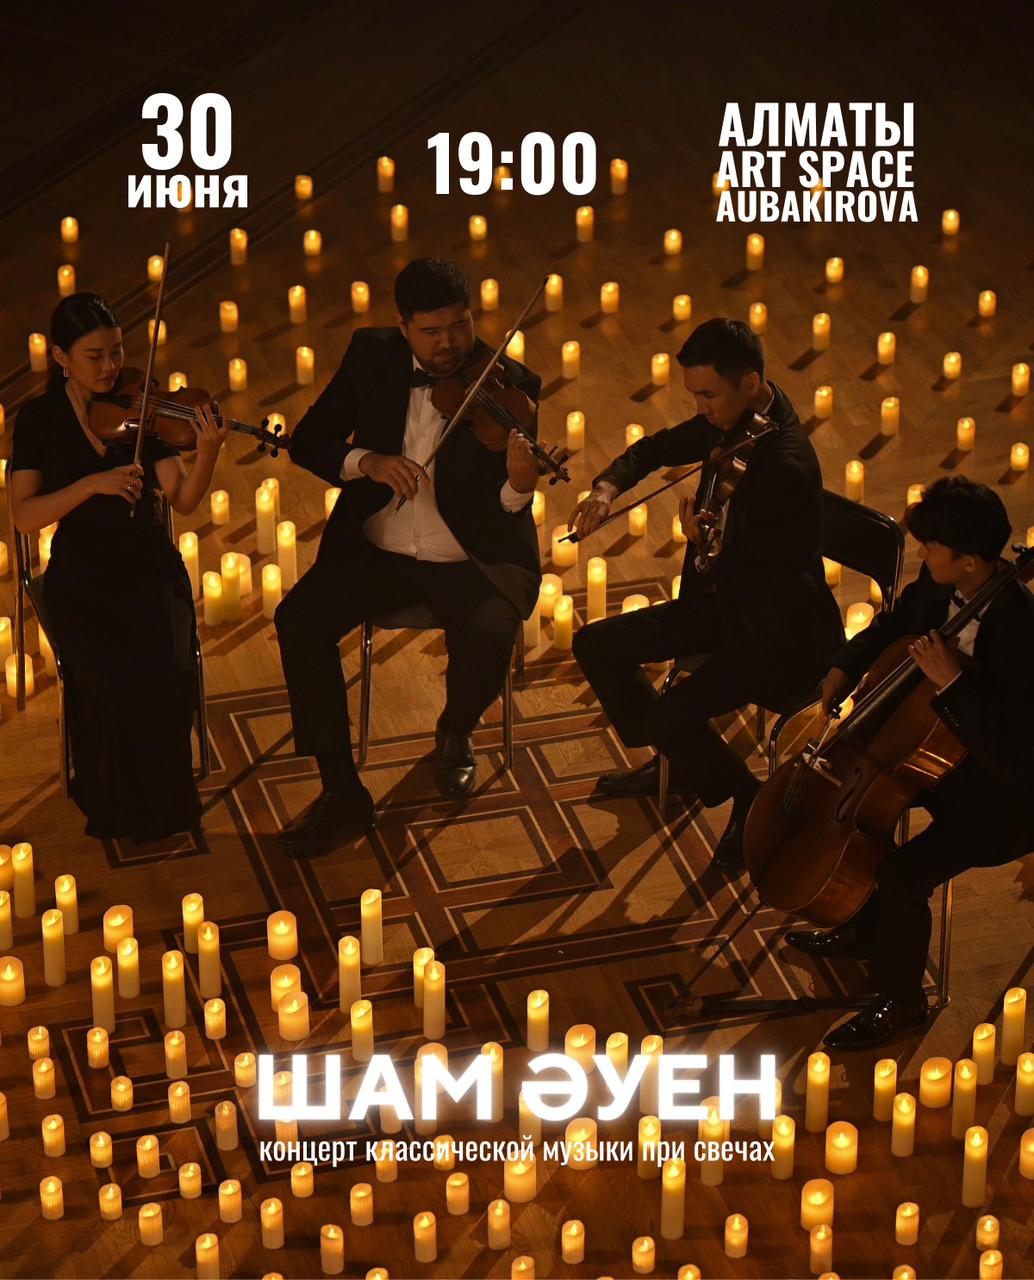 Classical music concerts by candlelight «Sham Auen» in Almaty